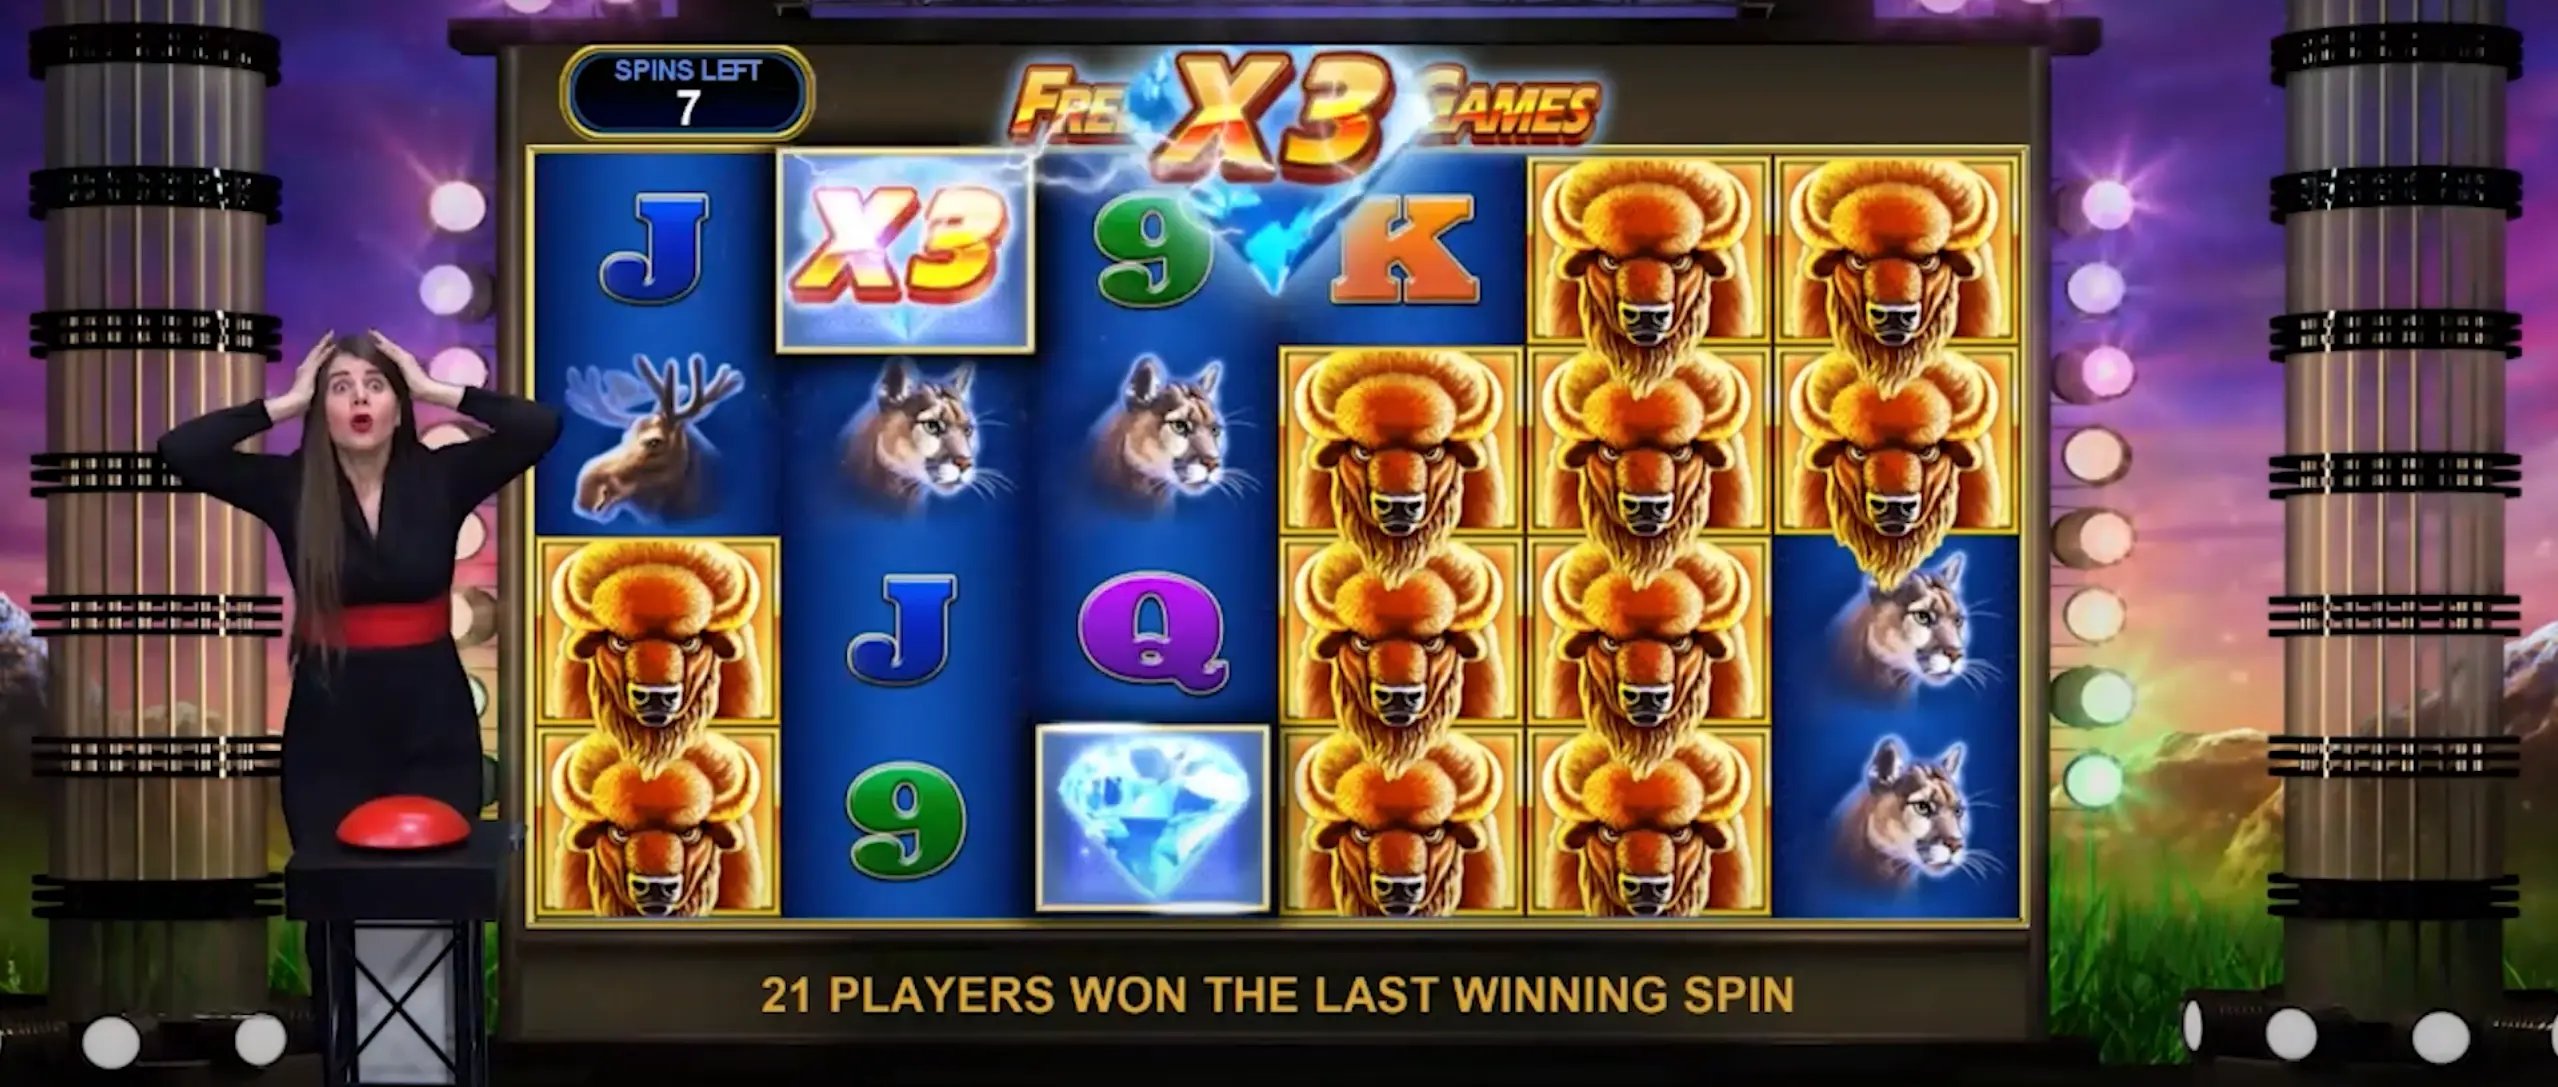 Playtech introduces an ambitious industry first: the Buffalo Blitz Live Slot